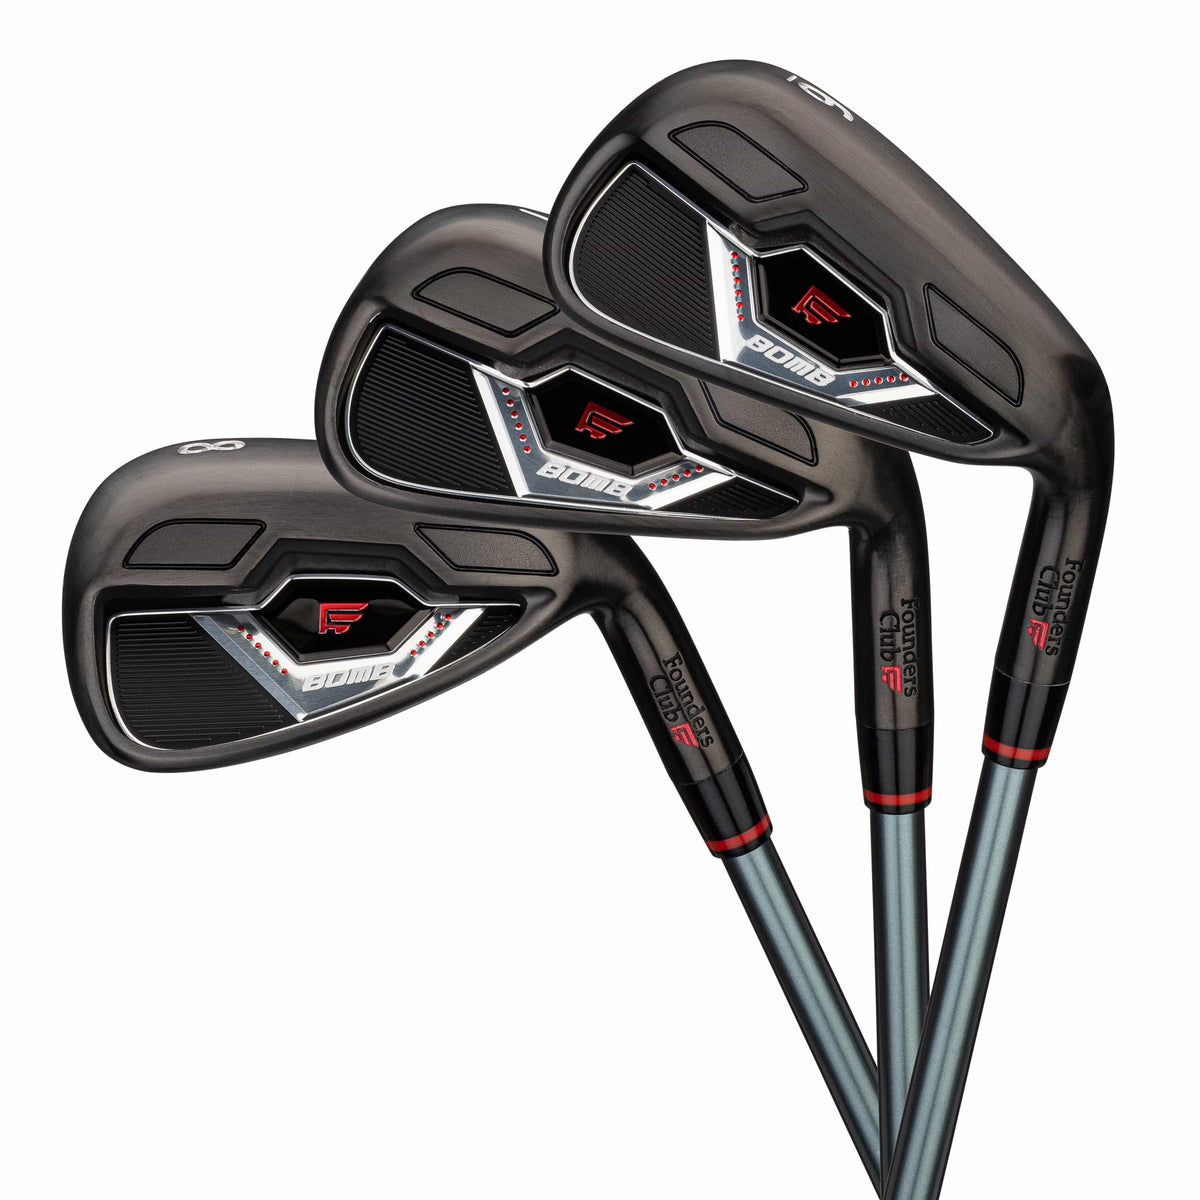 Founders Club Bomb Combo Irons Steel Golf Set 3-PW Plus Free Sand Wedge